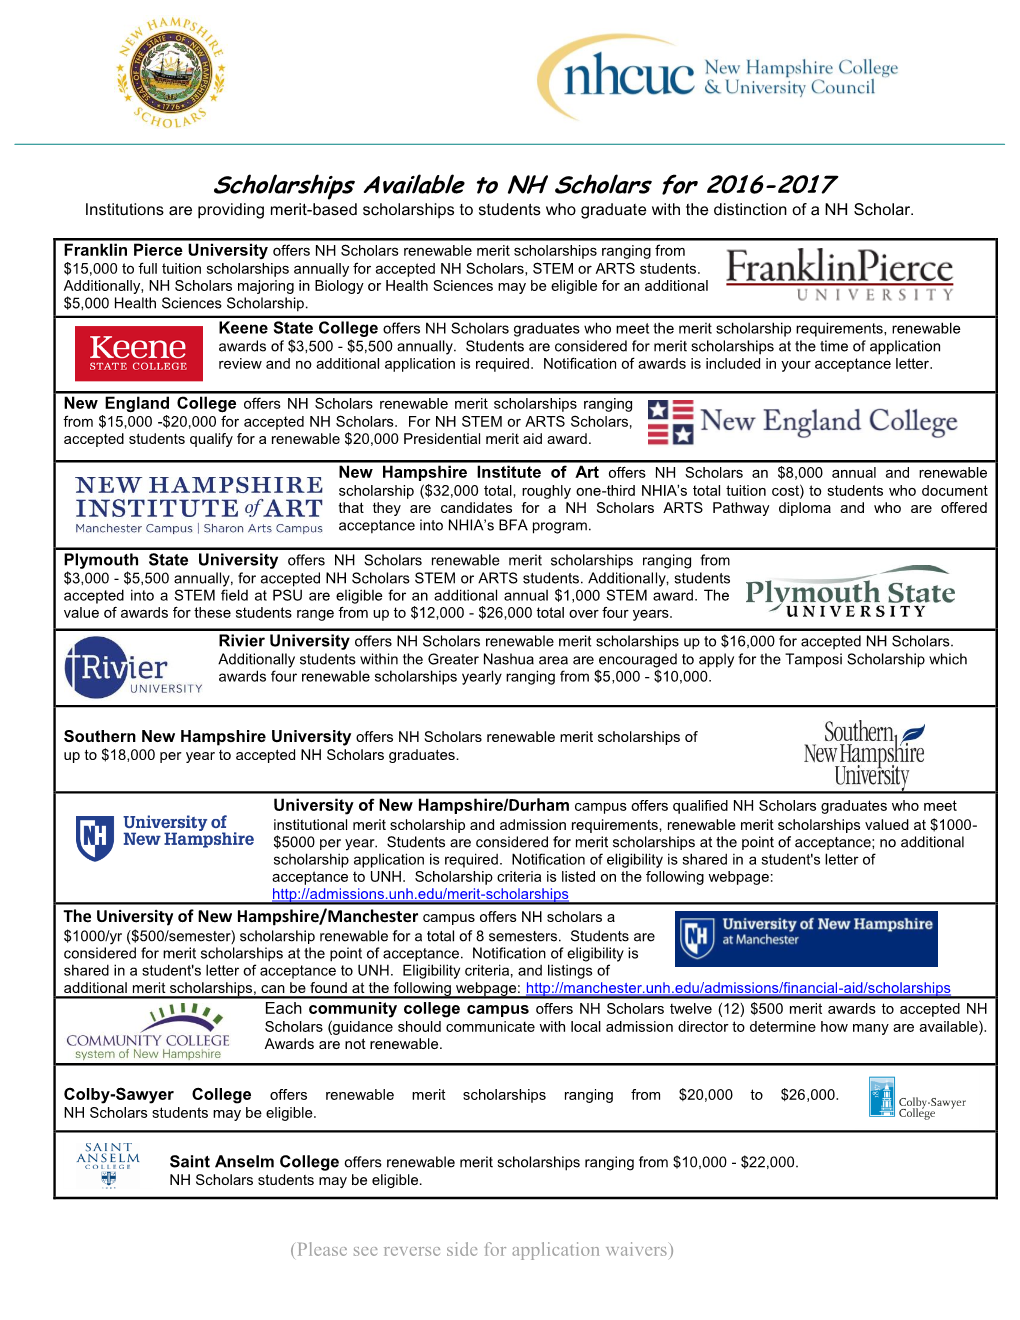 Scholarships Available to NH Scholars for 2016-2017 Institutions Are Providing Merit-Based Scholarships to Students Who Graduate with the Distinction of a NH Scholar